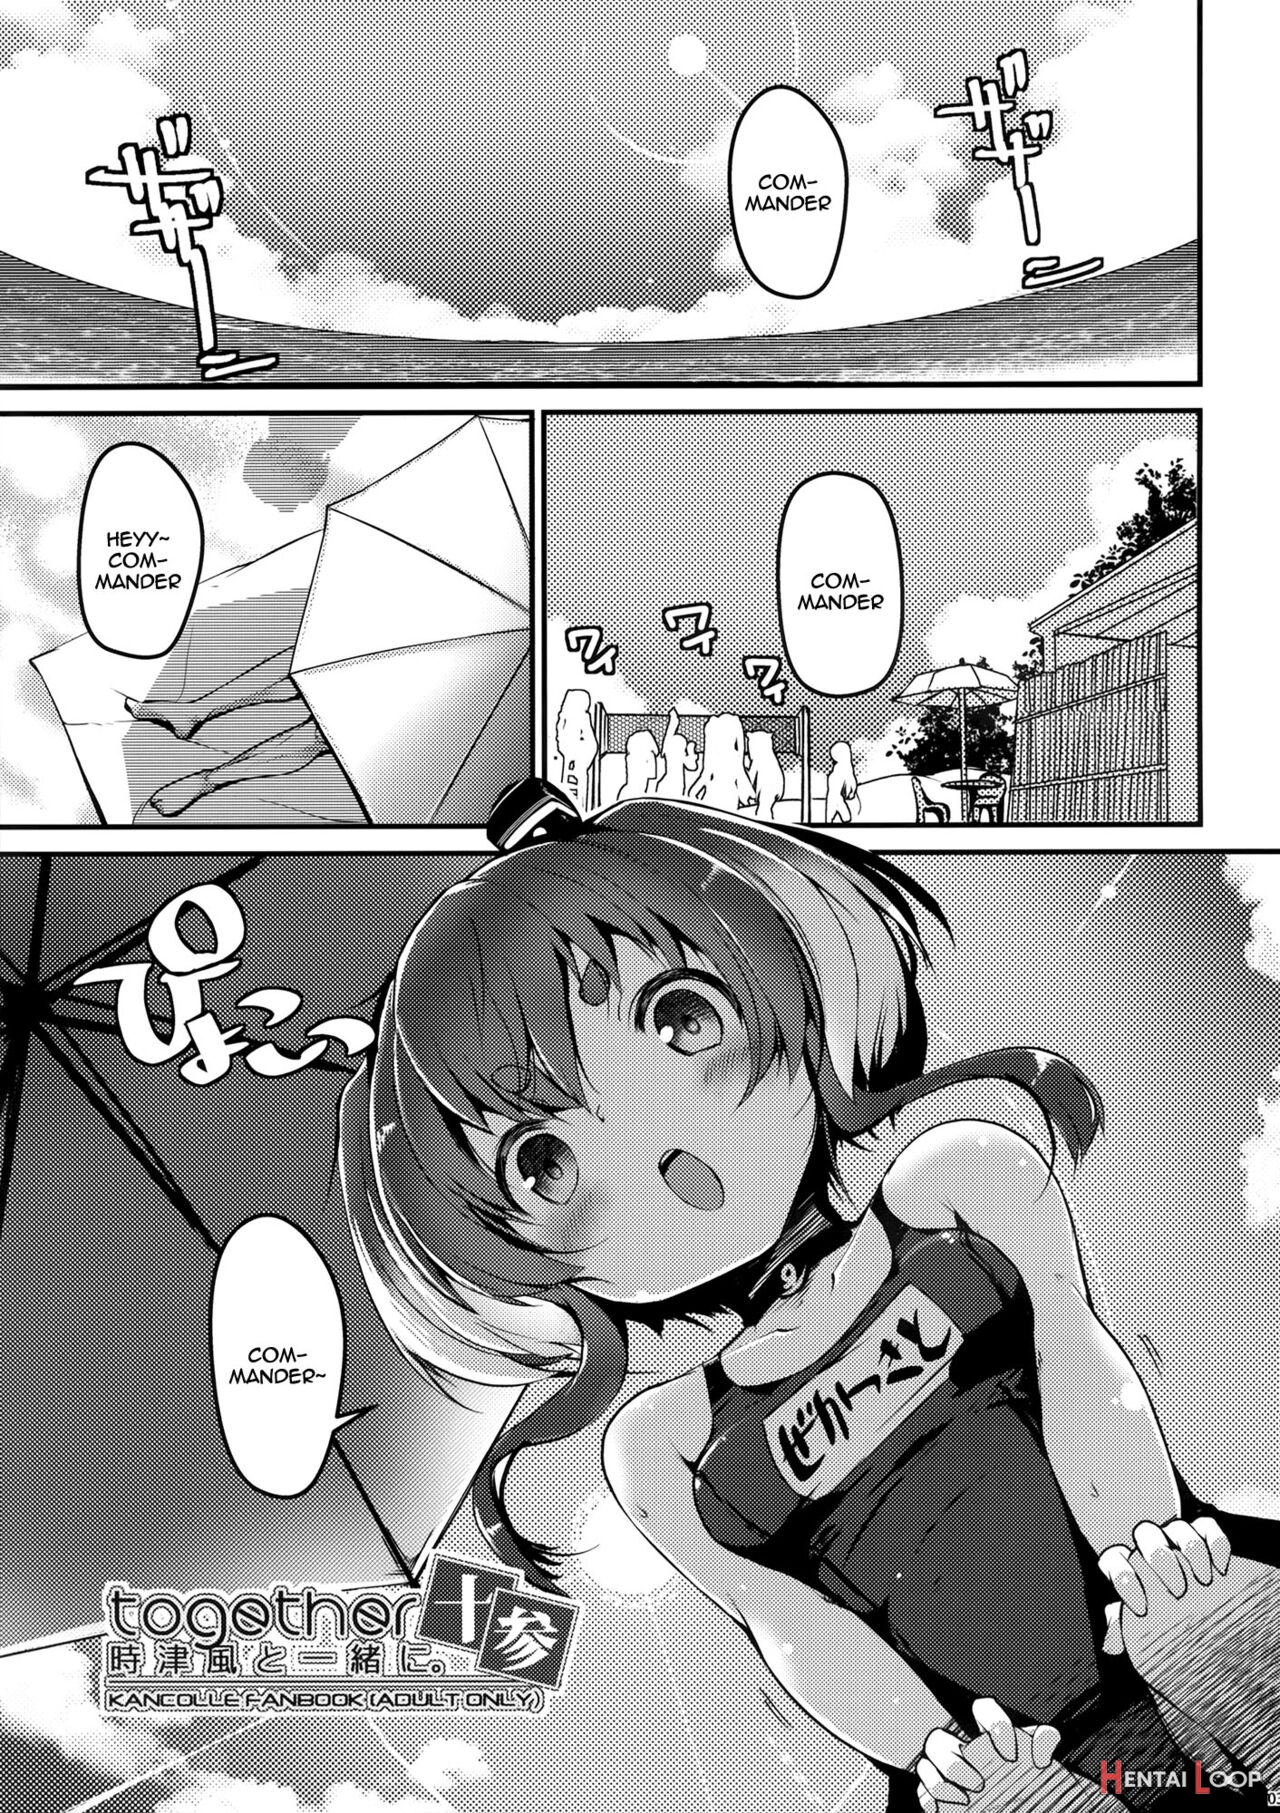 Together With Tokitsukaze 13 page 3